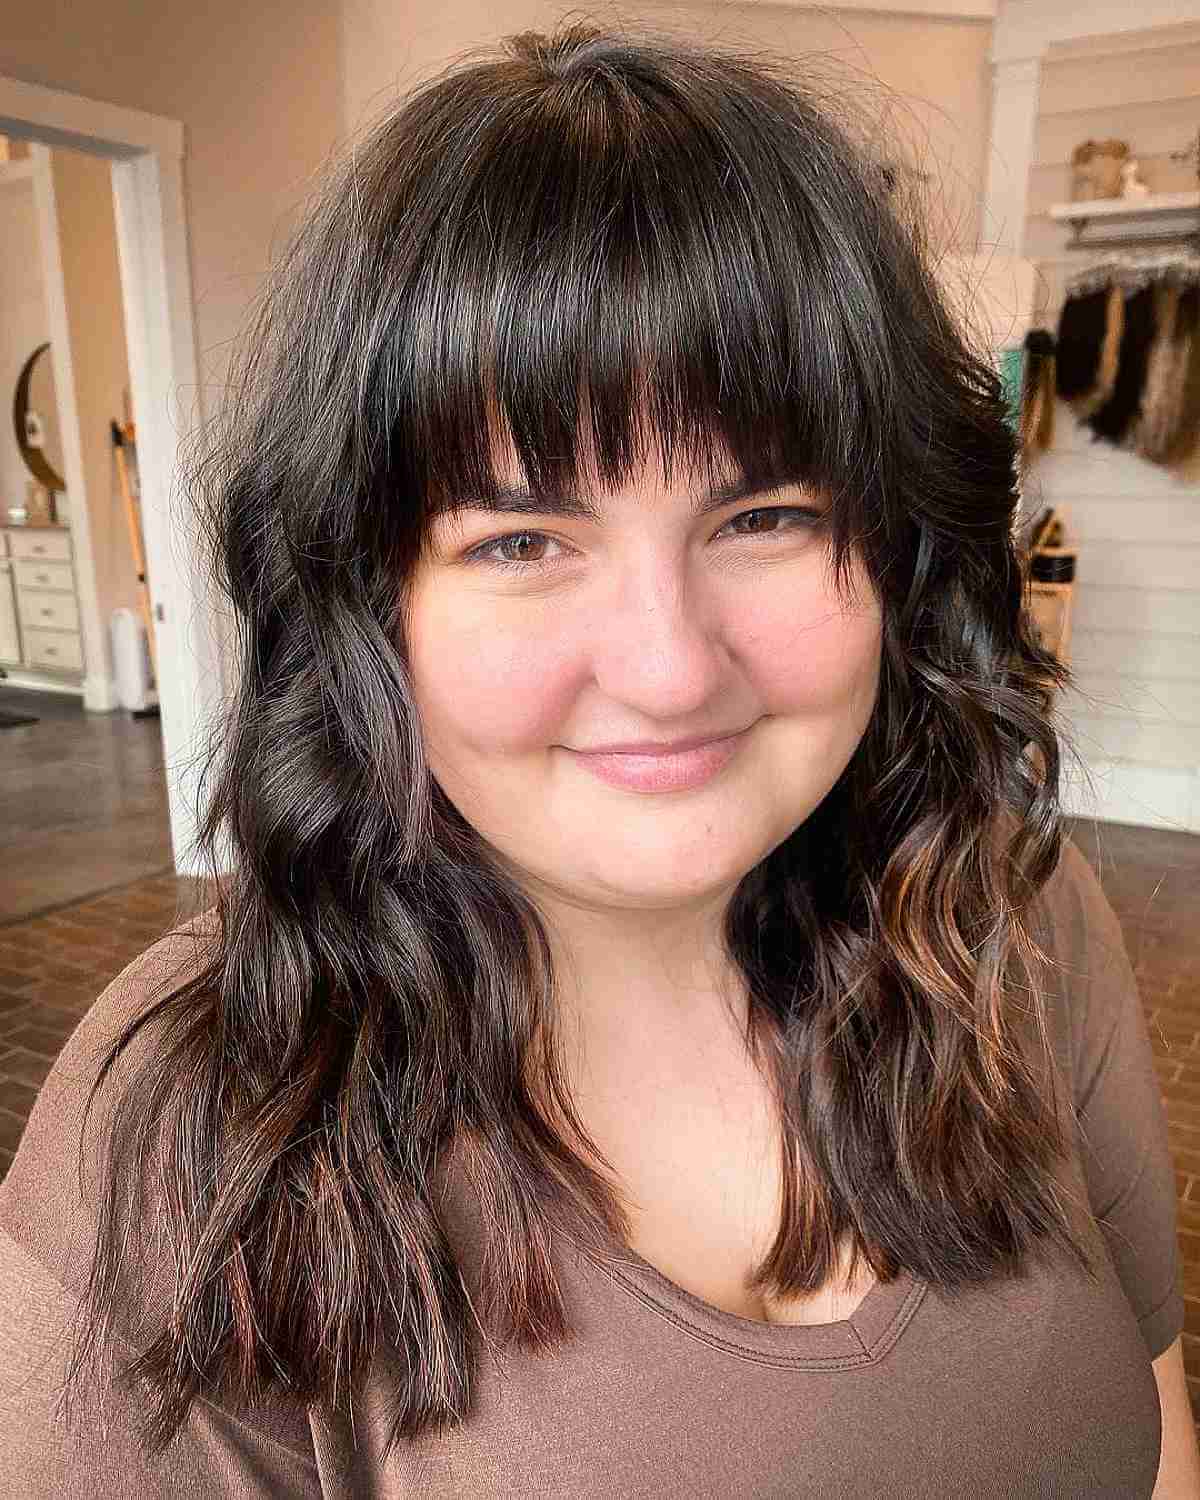 Curled Mid-Length Hair with Straight Bangs for Round Faces